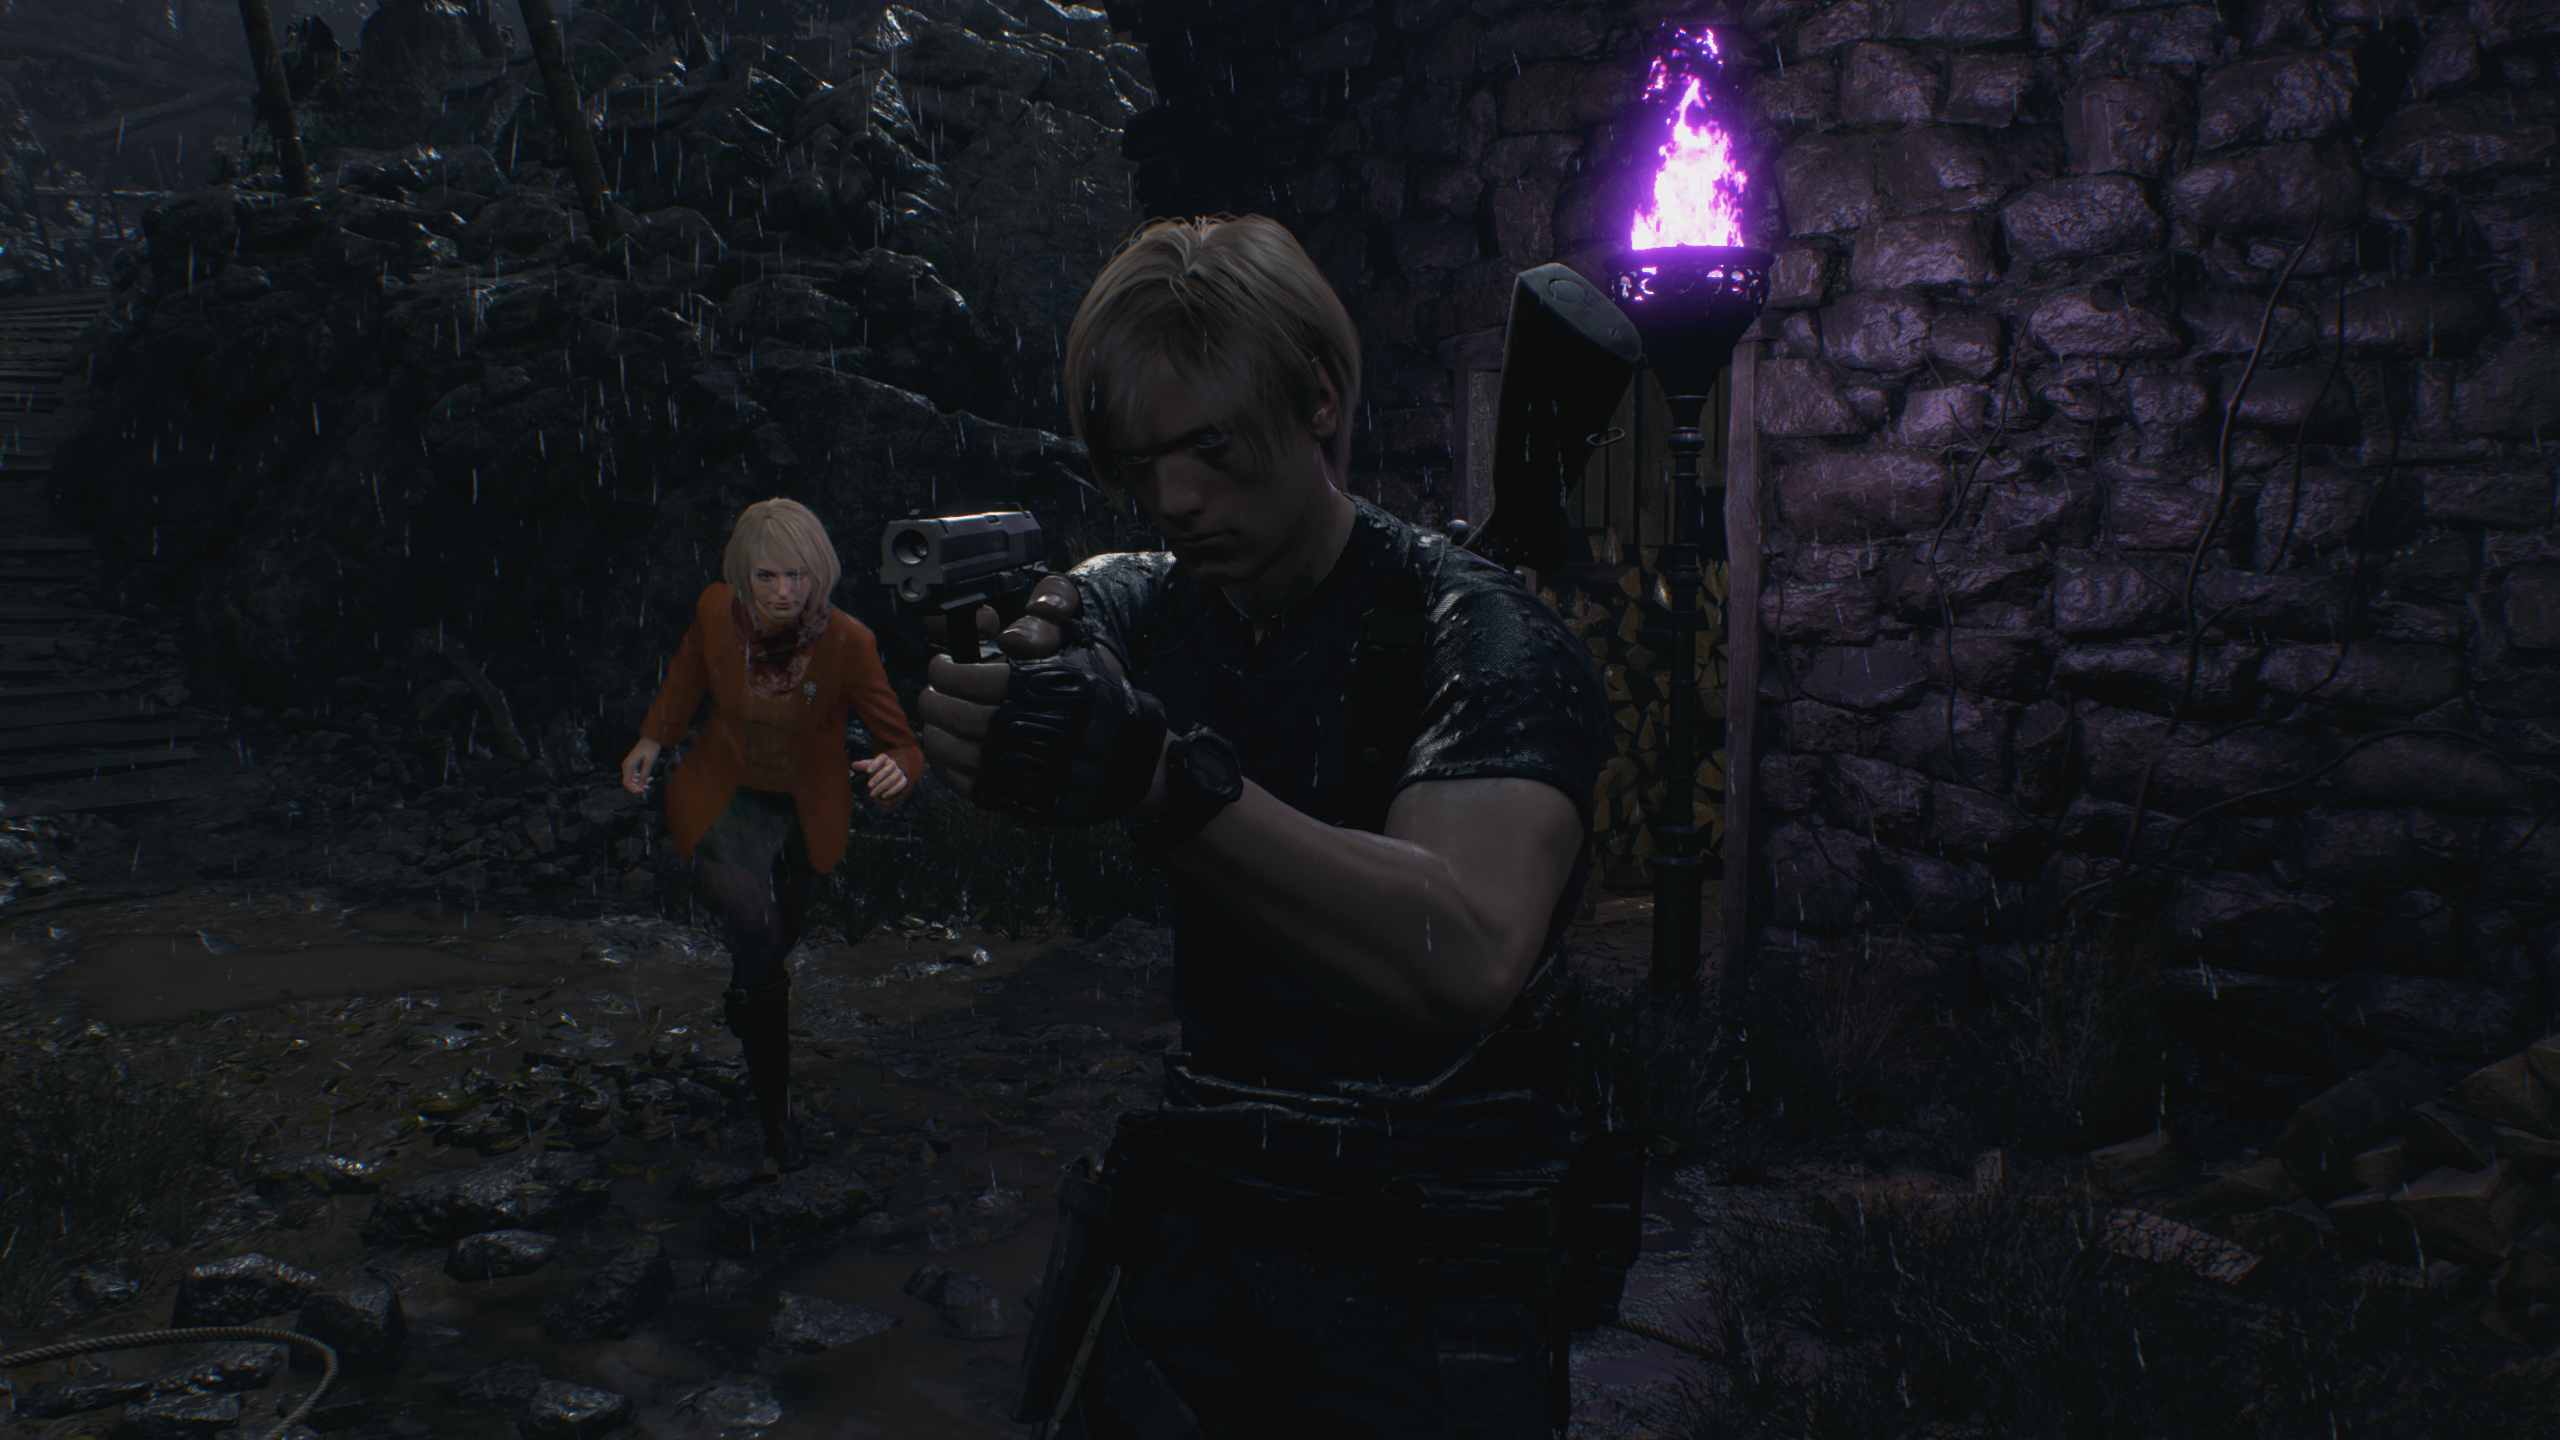 Leon takes aim with Ashley running behind him in the Resident Evil 4 remake.